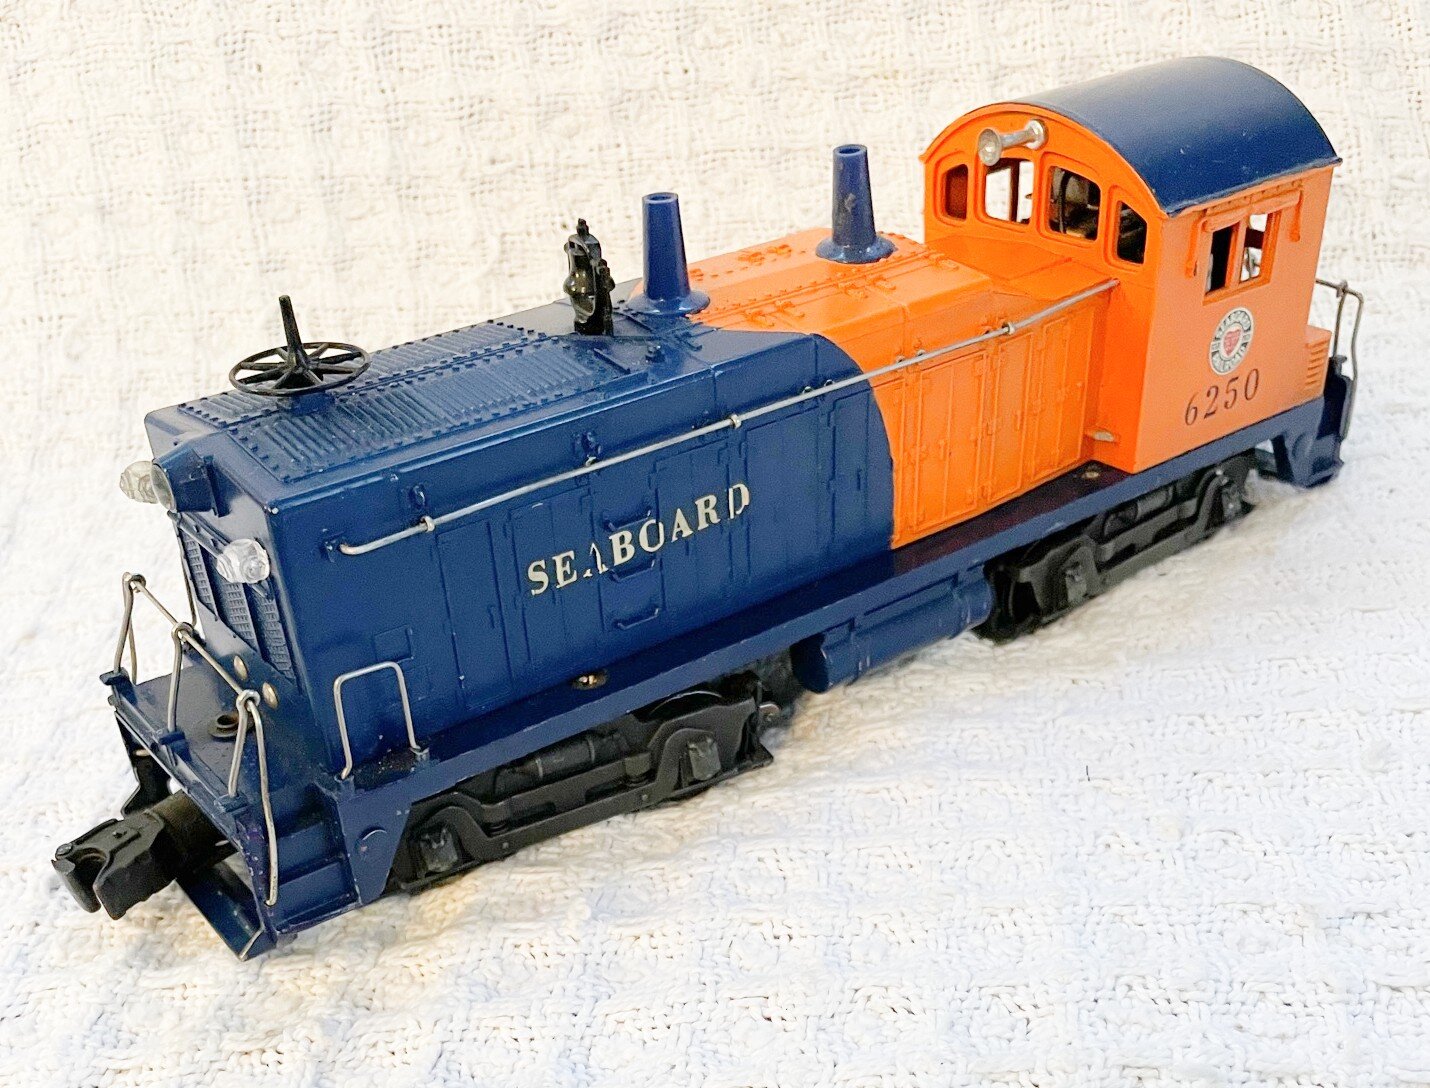 LIONEL PART 6250 PAIR OF BLUE STACKS FOR SEABOARD SWITCHER 